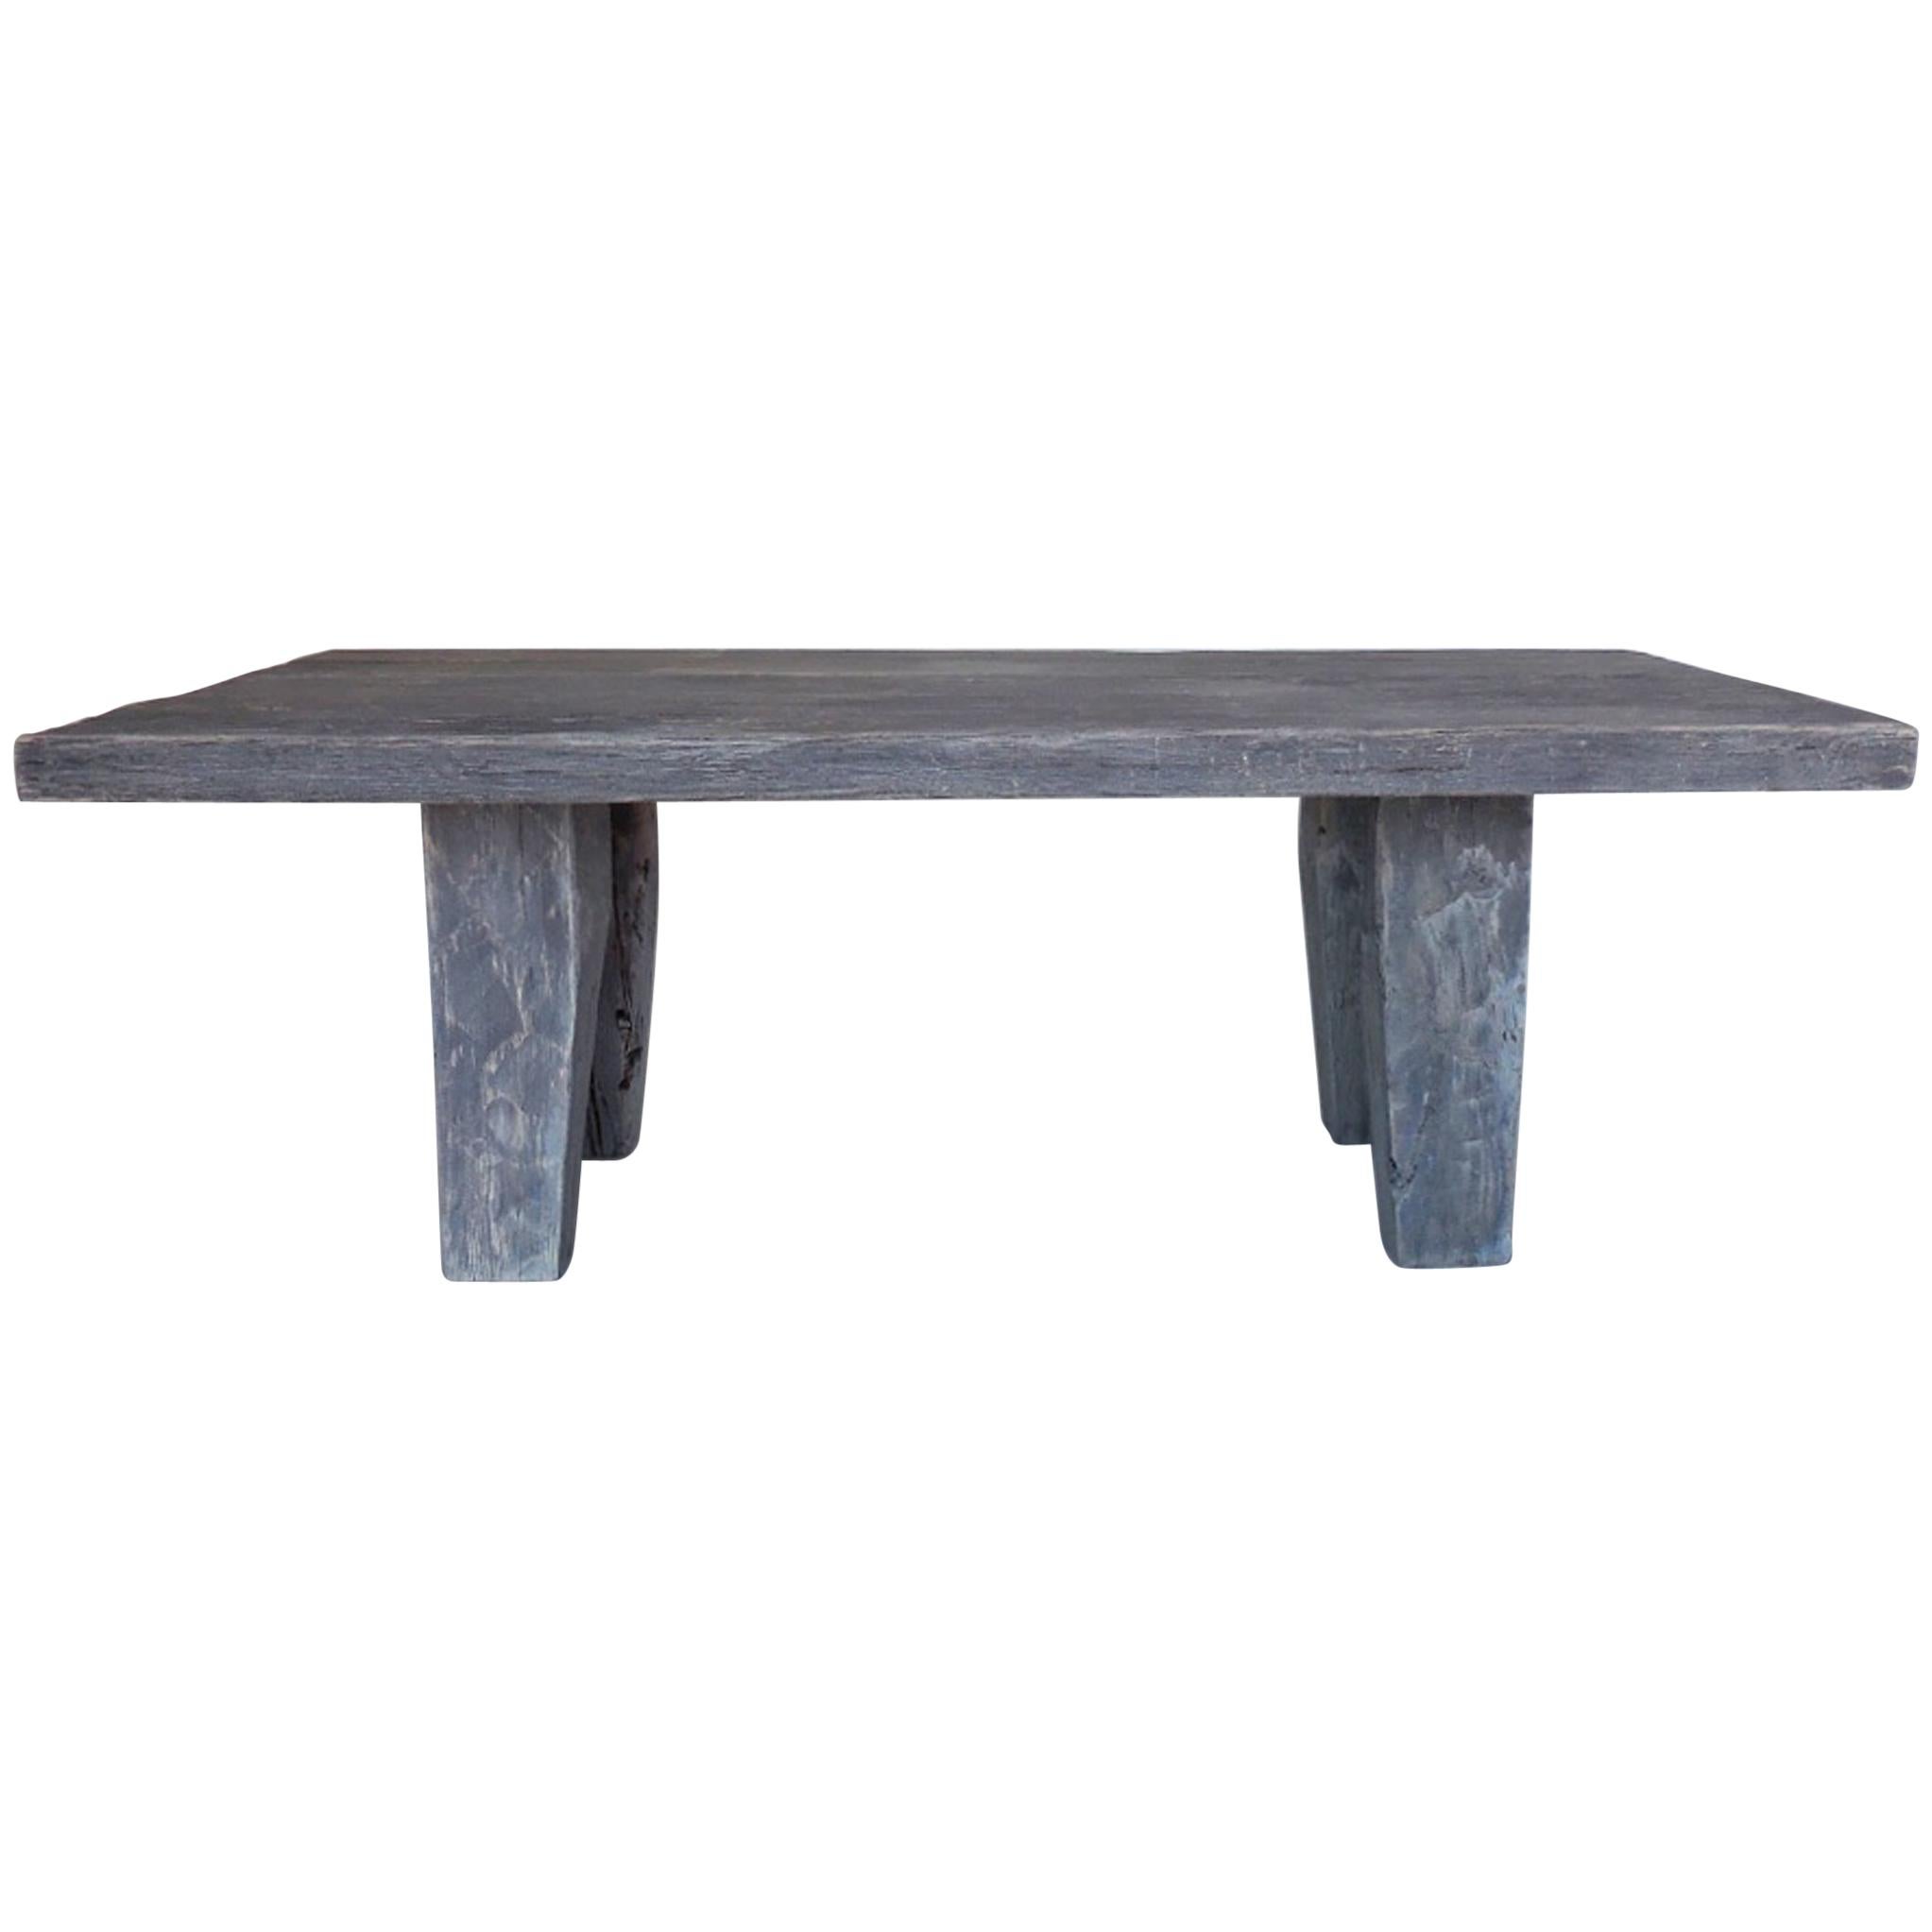 Rustic Large Scale Table